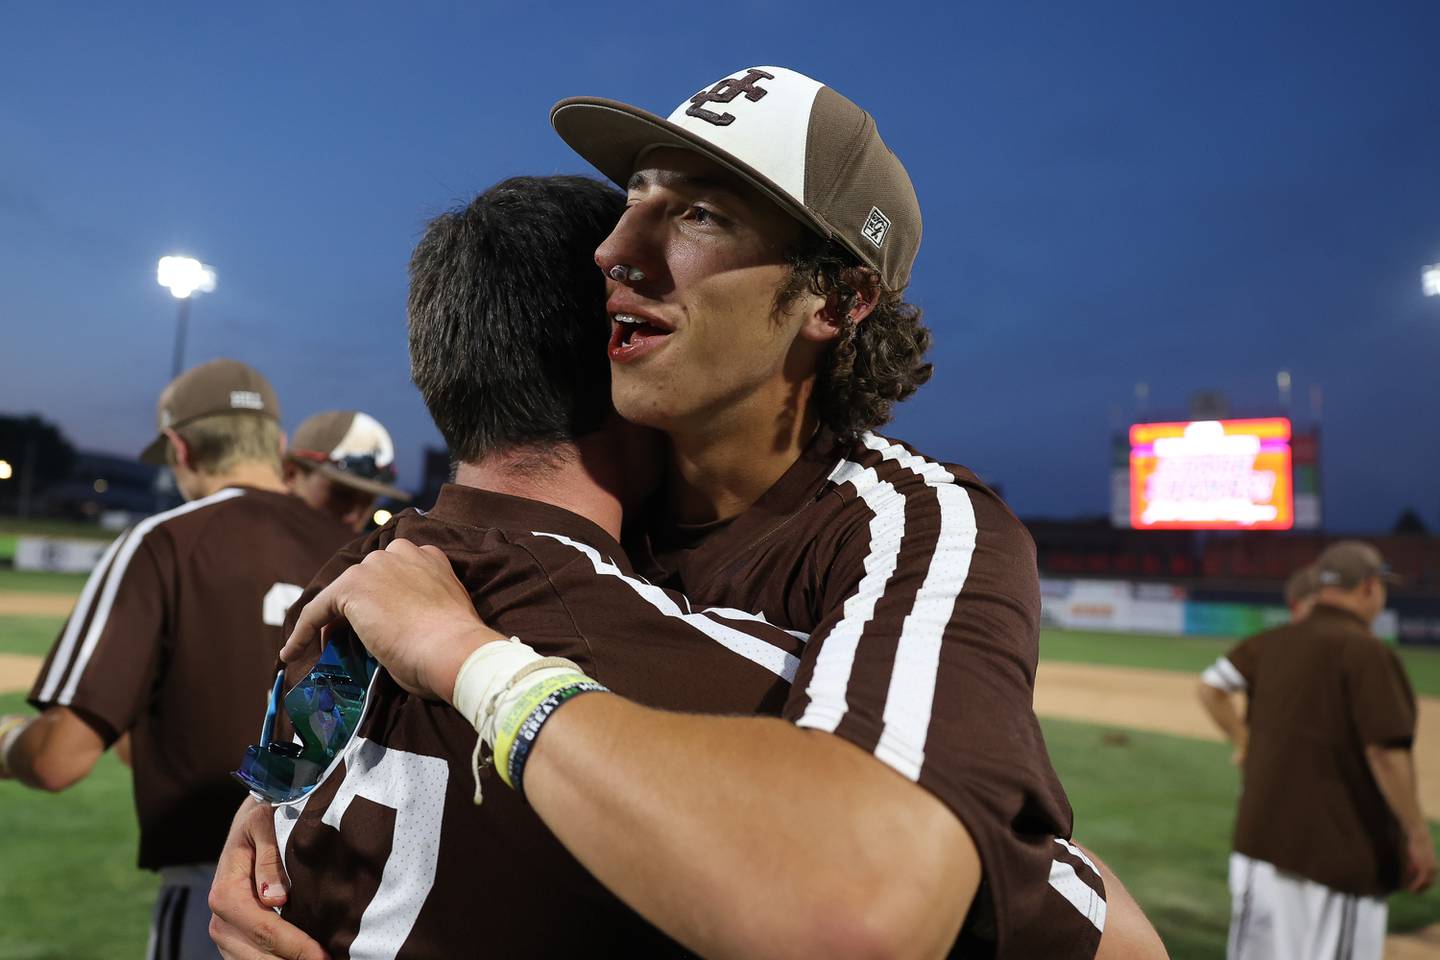 Joliet Catholic’s Jake Troyner hugs Jake Gimbel after the win against Columbia in the IHSA Class 2A State Championship on Saturday, June 3, 2023 in Peoria.